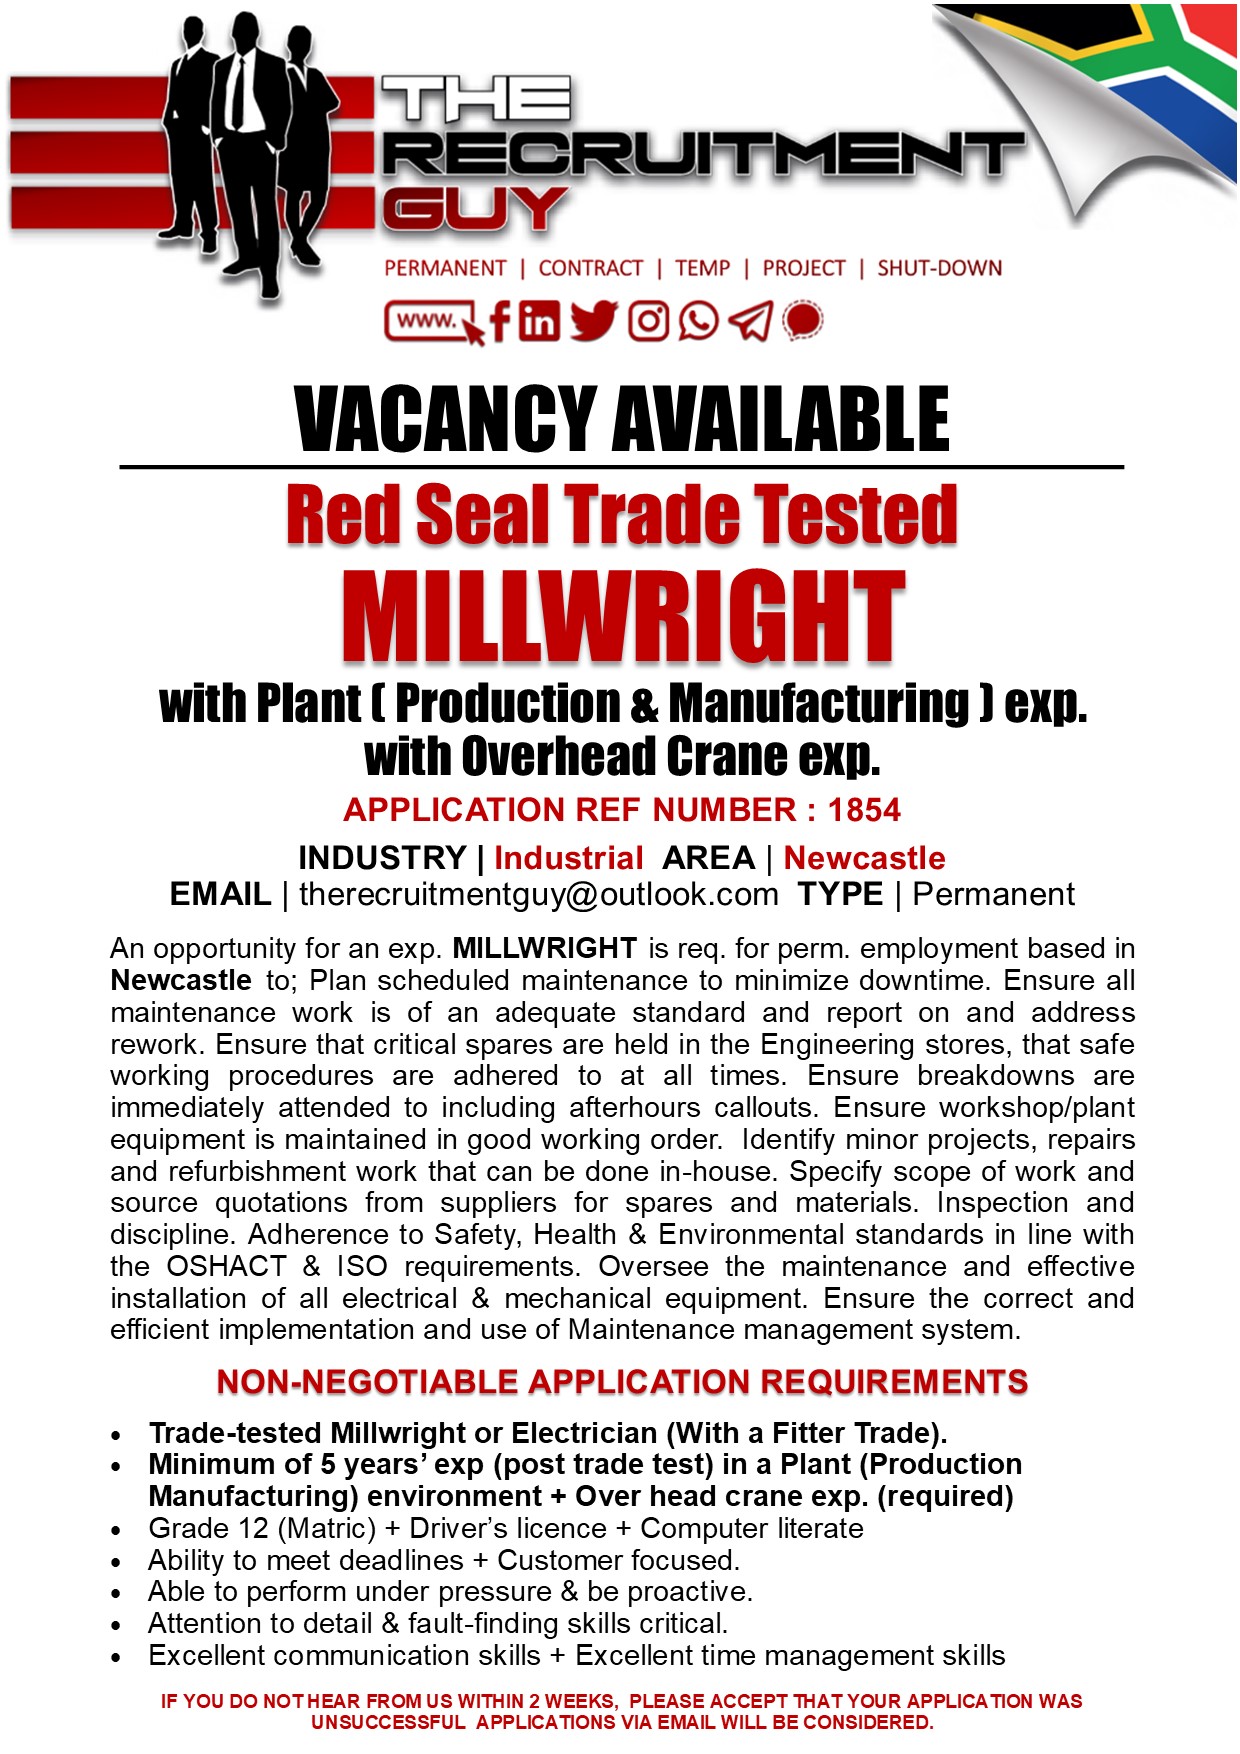 PERMANENT | CONTRACT | TEMP | PROJECT | SHUT-DOWN

CT efRYOOL®

VACANCY AVAILABLE
Red Seal Trade Tested

MILLWRIGHT

with Plant [ Production &amp; Manufacturing ) exp.
with Overhead Crane exp.

APPLICATION REF NUMBER : 1854

INDUSTRY | Industrial AREA | Newcastle
EMAIL | therecruitmentguy@outlook.com TYPE | Permanent

An opportunity for an exp. MILLWRIGHT is req. for perm. employment based in
Newcastle to; Plan scheduled maintenance to minimize downtime. Ensure all
maintenance work is of an adequate standard and report on and address
rework. Ensure that critical spares are held in the Engineering stores, that safe
working procedures are adhered to at all times. Ensure breakdowns are
immediately attended to including afterhours callouts. Ensure workshop/plant
equipment is maintained in good working order. Identify minor projects, repairs
and refurbishment work that can be done in-house. Specify scope of work and
source quotations from suppliers for spares and materials. Inspection and
discipline. Adherence to Safety, Health &amp; Environmental standards in line with
the OSHACT &amp; ISO requirements. Oversee the maintenance and effective
installation of all electrical &amp; mechanical equipment. Ensure the correct and
efficient implementation and use of Maintenance management system

NON-NEGOTIABLE APPLICATION REQUIREMENTS

+ Trade-tested Millwright or Electrician (With a Fitter Trade).
Minimum of § years’ exp (post trade test) in a Plant (Production
Manufacturing) environment + Over head crane exp. (required)
Grade 12 (Matric) + Driver's licence + Computer literate

Ability to meet deadlines + Customer focused

Able to perform under pressure &amp; be proactive

Attention to detail &amp; fault-finding skills critical

Excellent communication skills + Excellent time management skills

IF YOU DO NOTHEAR FROM US WITHIN 2 WEEKS, PLEASE ACCEPT THAT YOUR APPLICATION WAS
UNSUCCESSFUL APPLICATIONS VIA EMAIL WILL BE CONSIDERED.